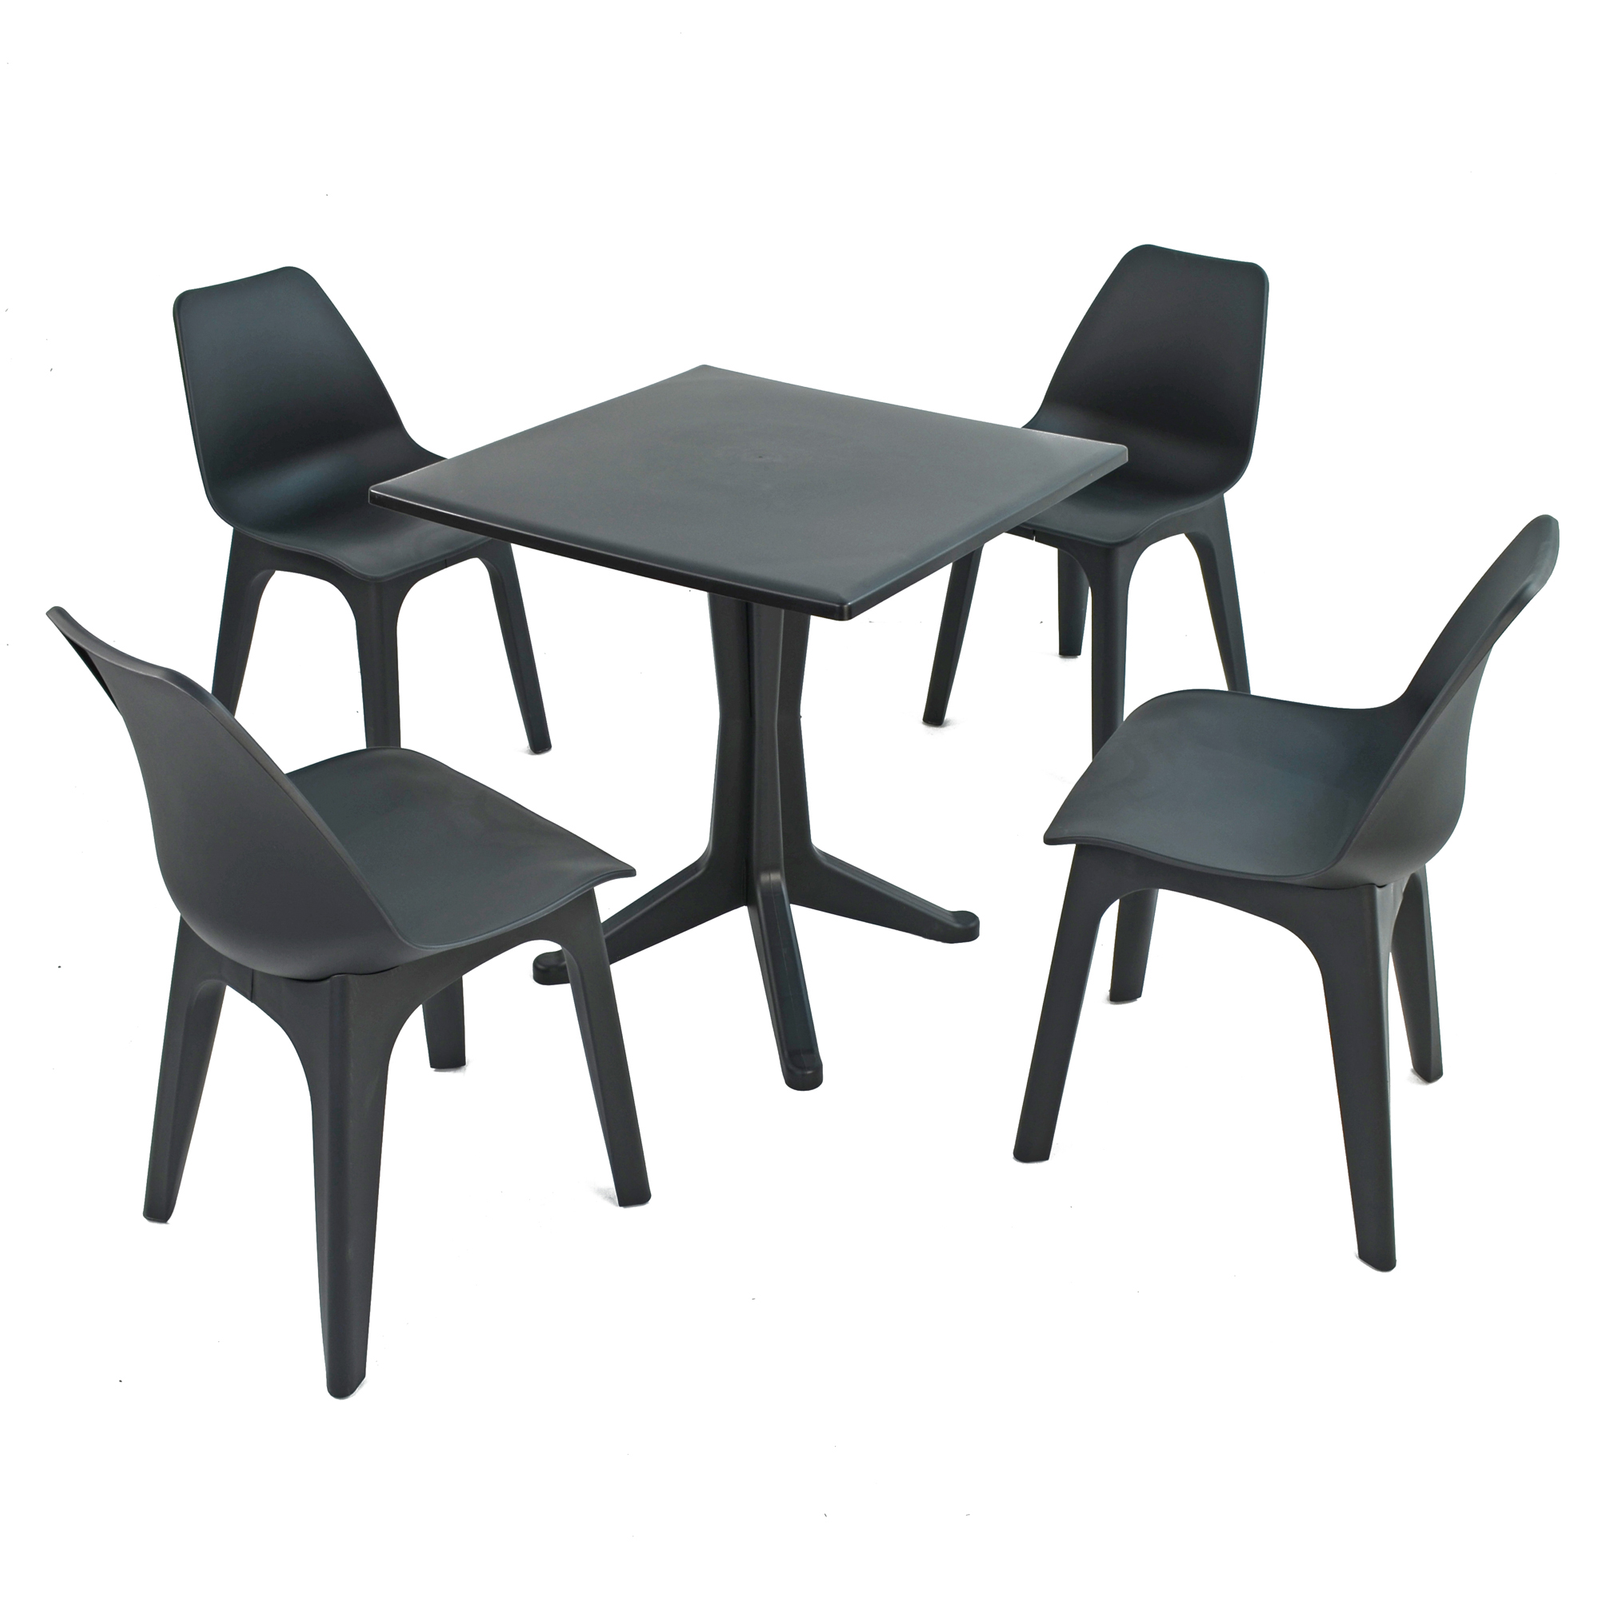 Trabella Anthracite Ponente Dining Table With 4 Eolo Chairs Dining Sets Trabella   